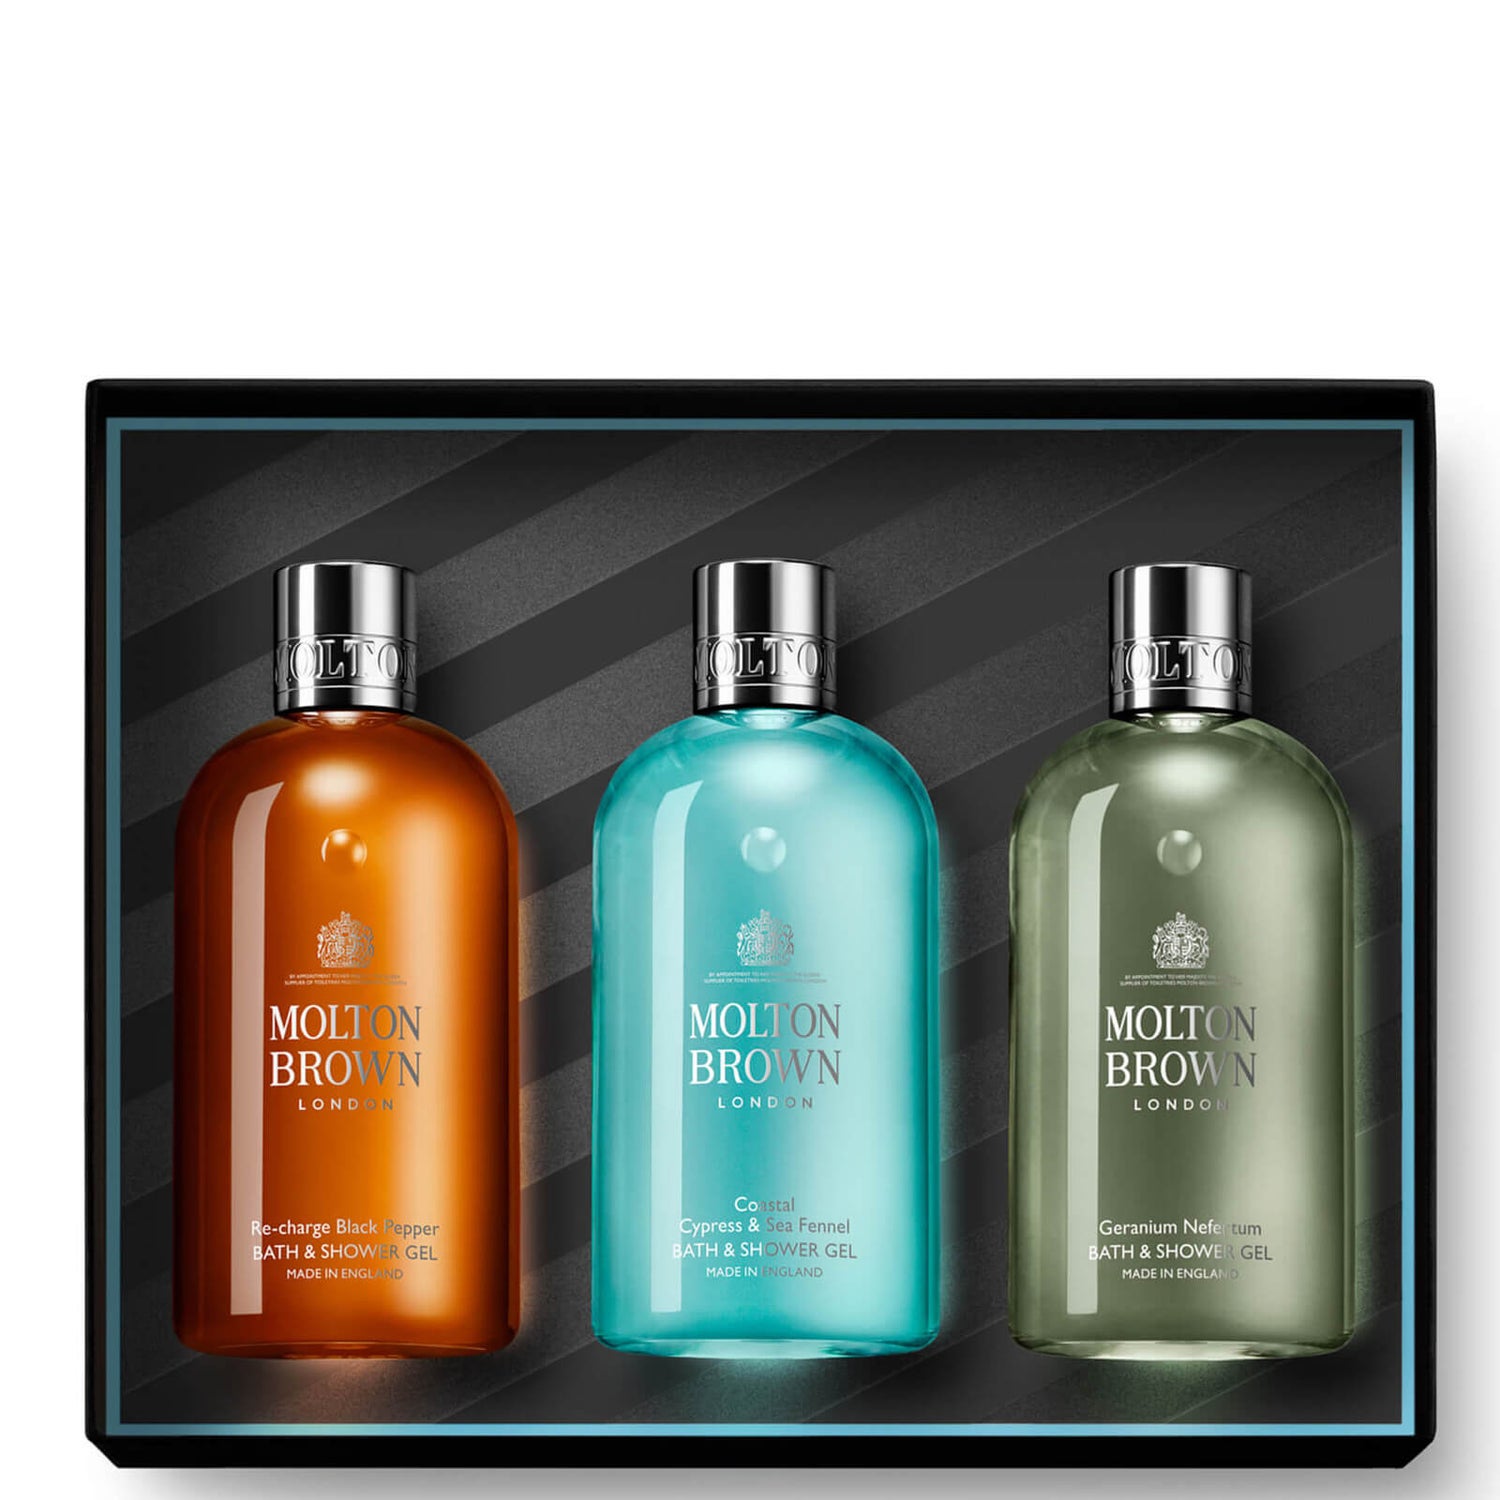 Molton Brown Spicy & Aromatic Bath & Shower Gift Set